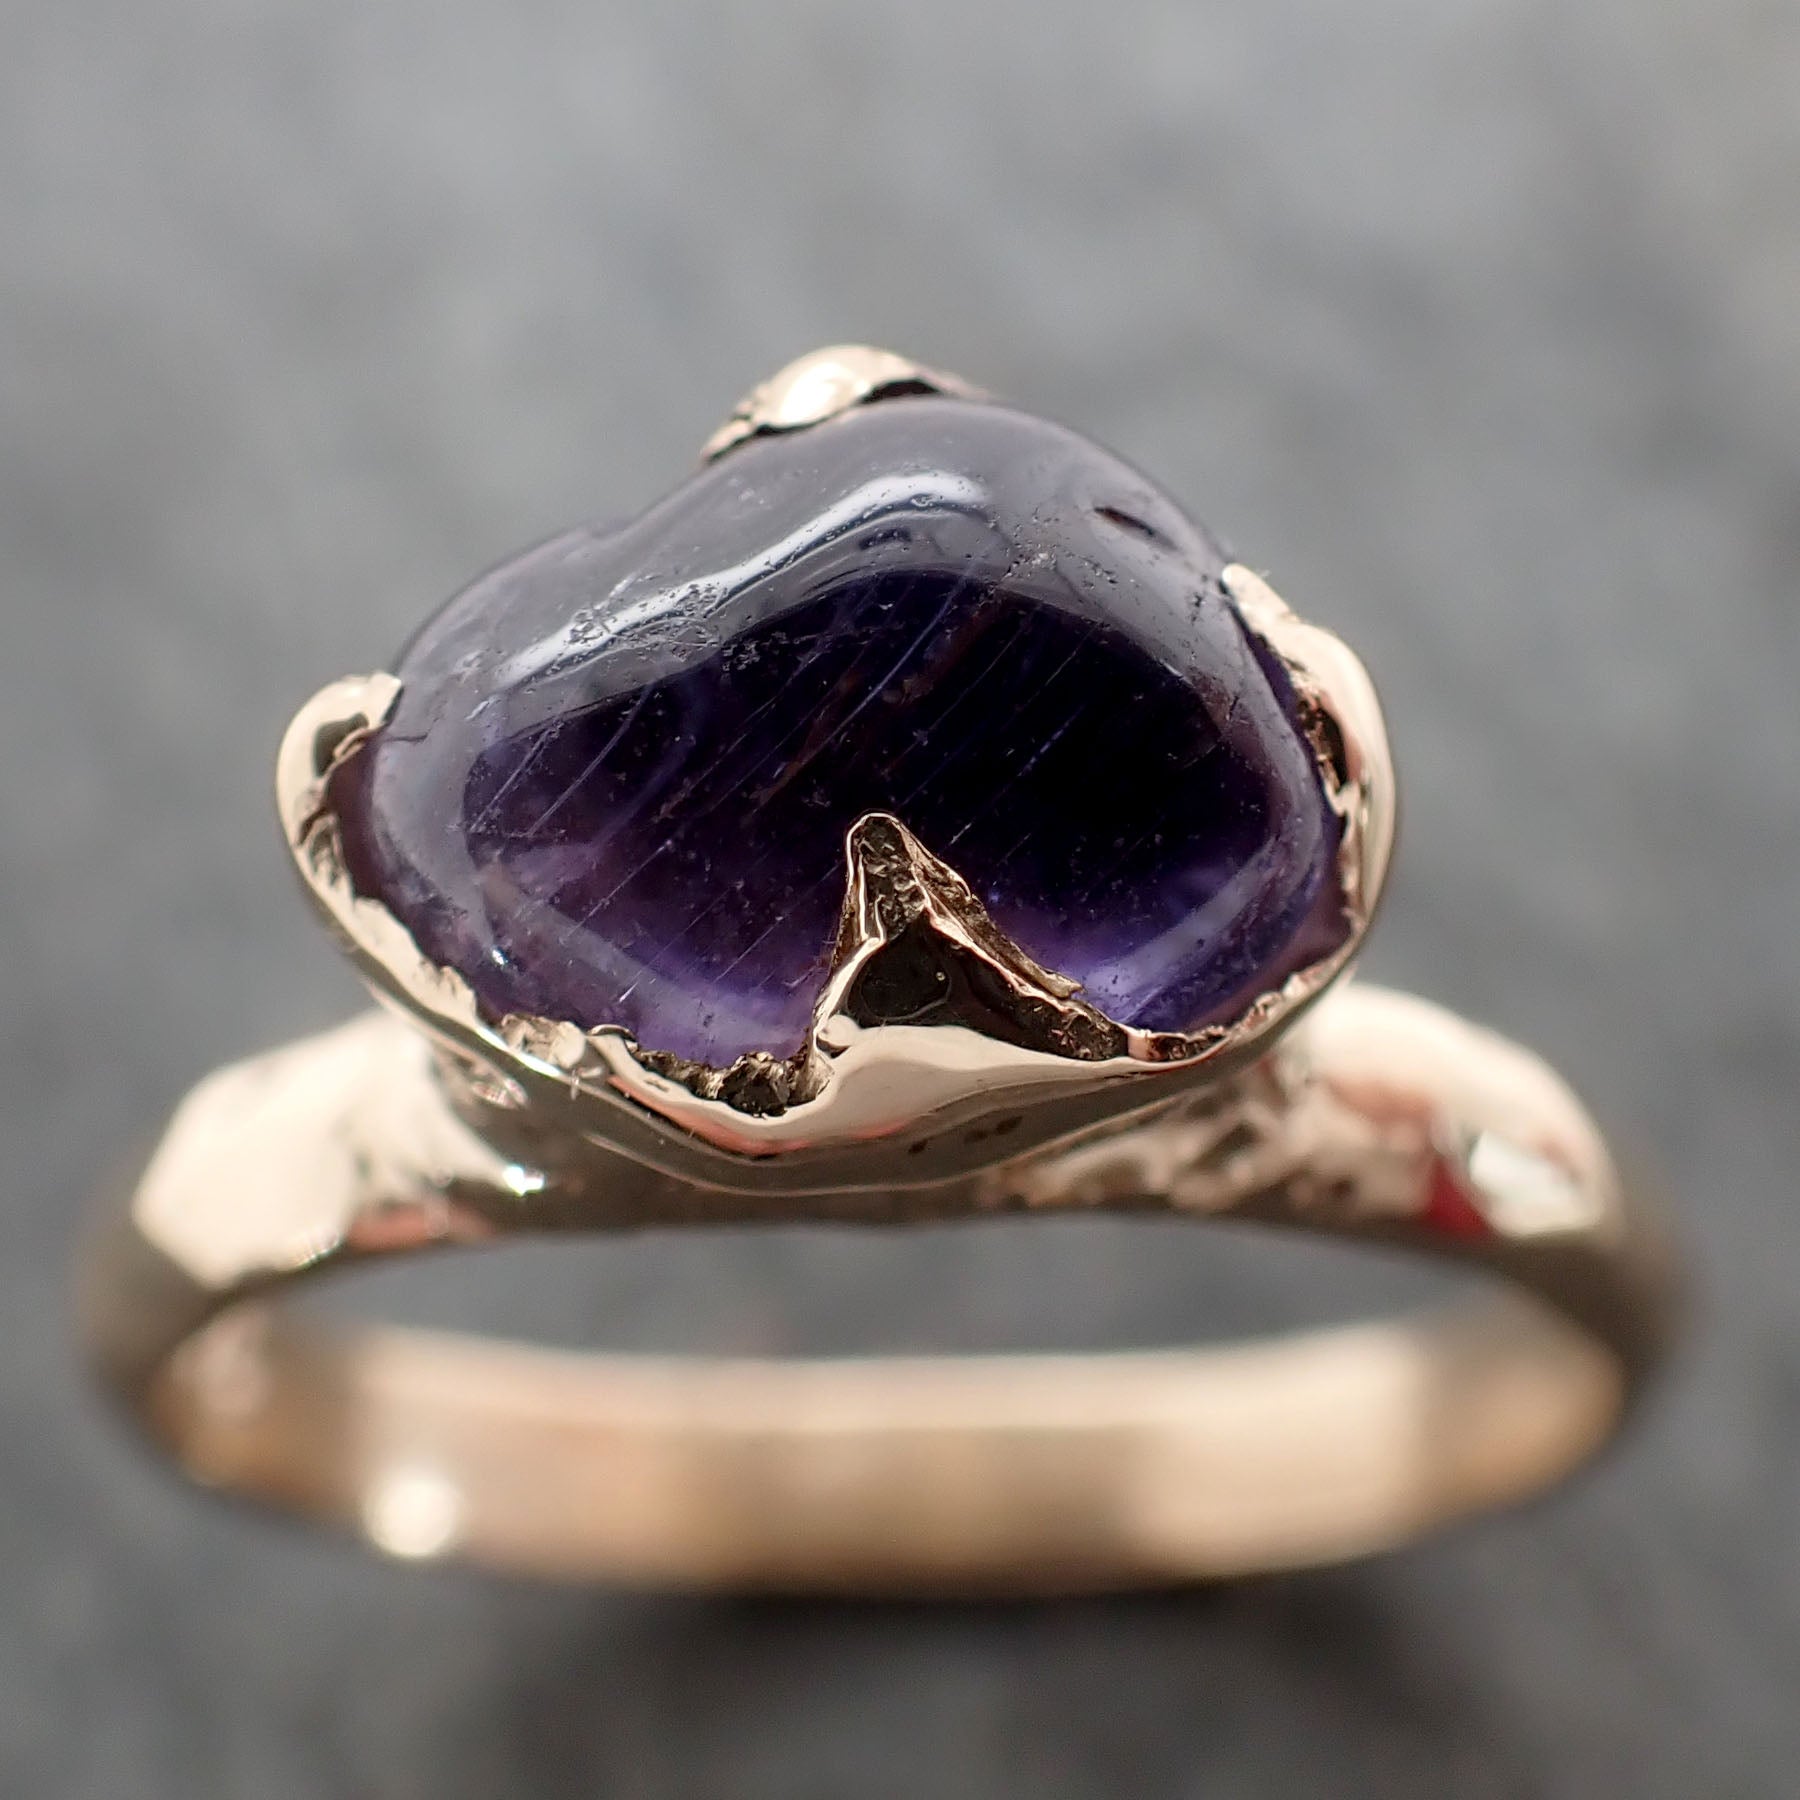 Sapphire tumbled 14k yellow gold Solitaire purple tumbled gemstone ring 2844